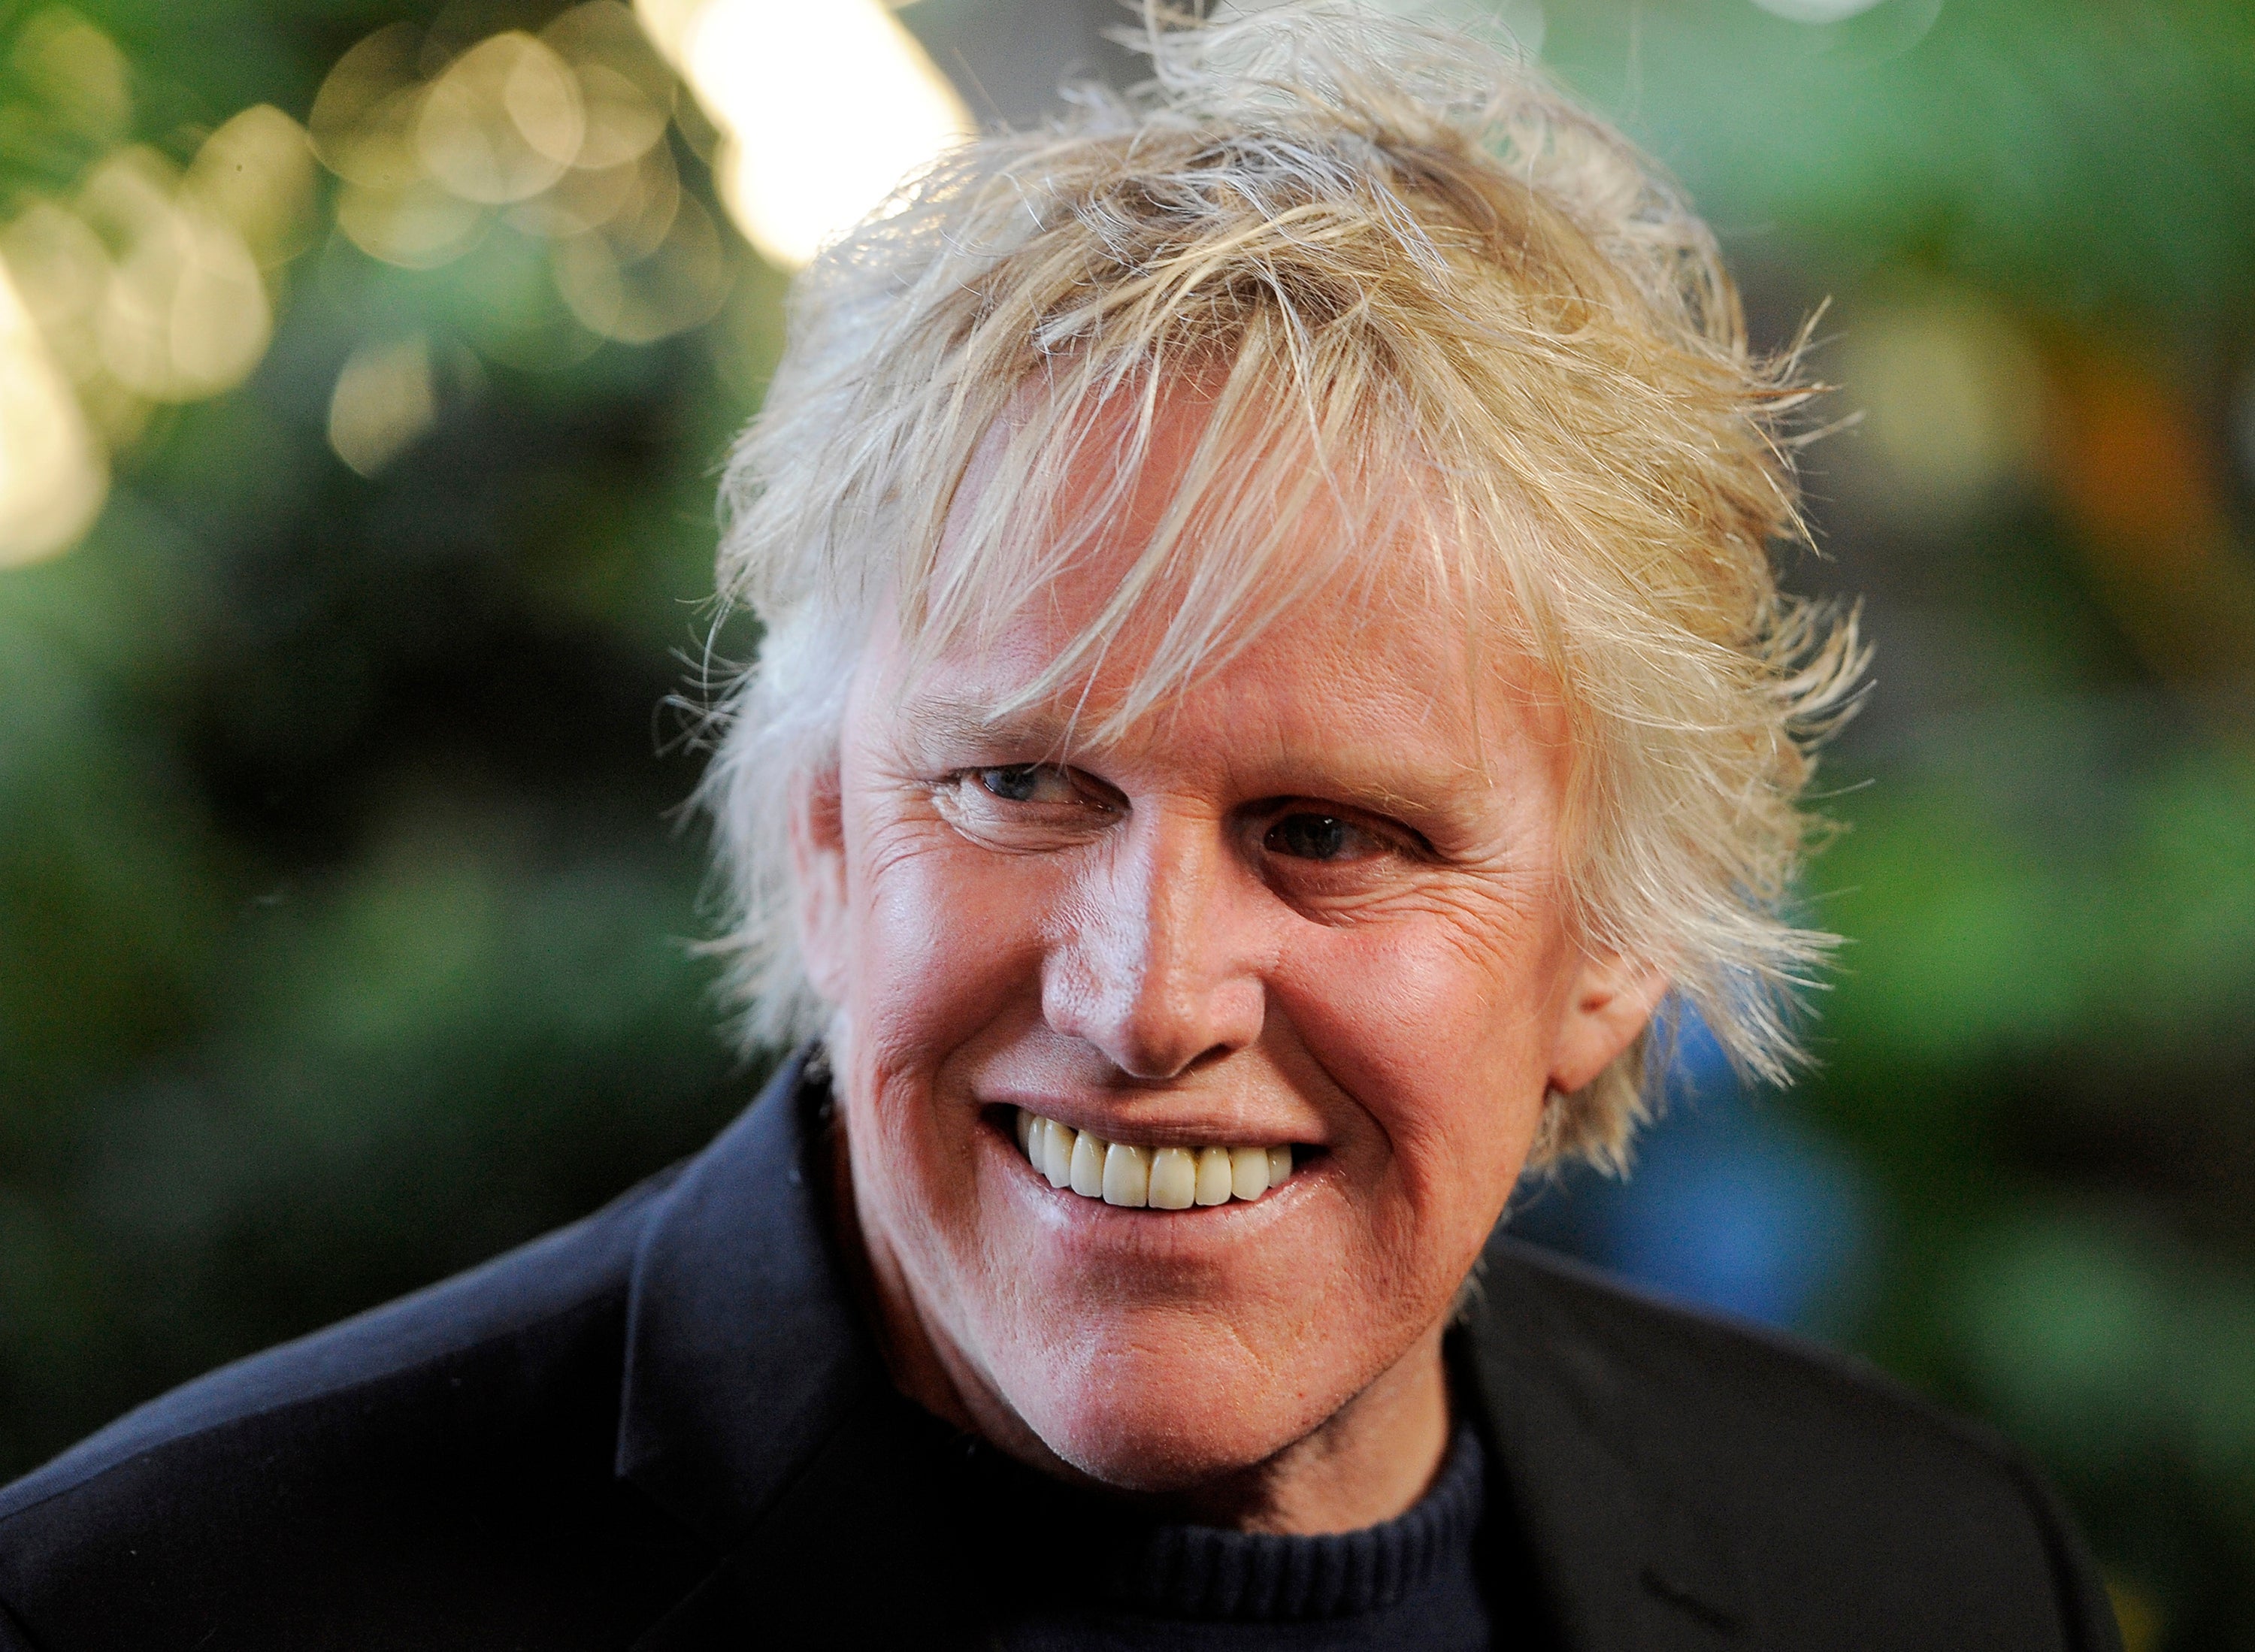 Sexual Misconduct-Gary Busey